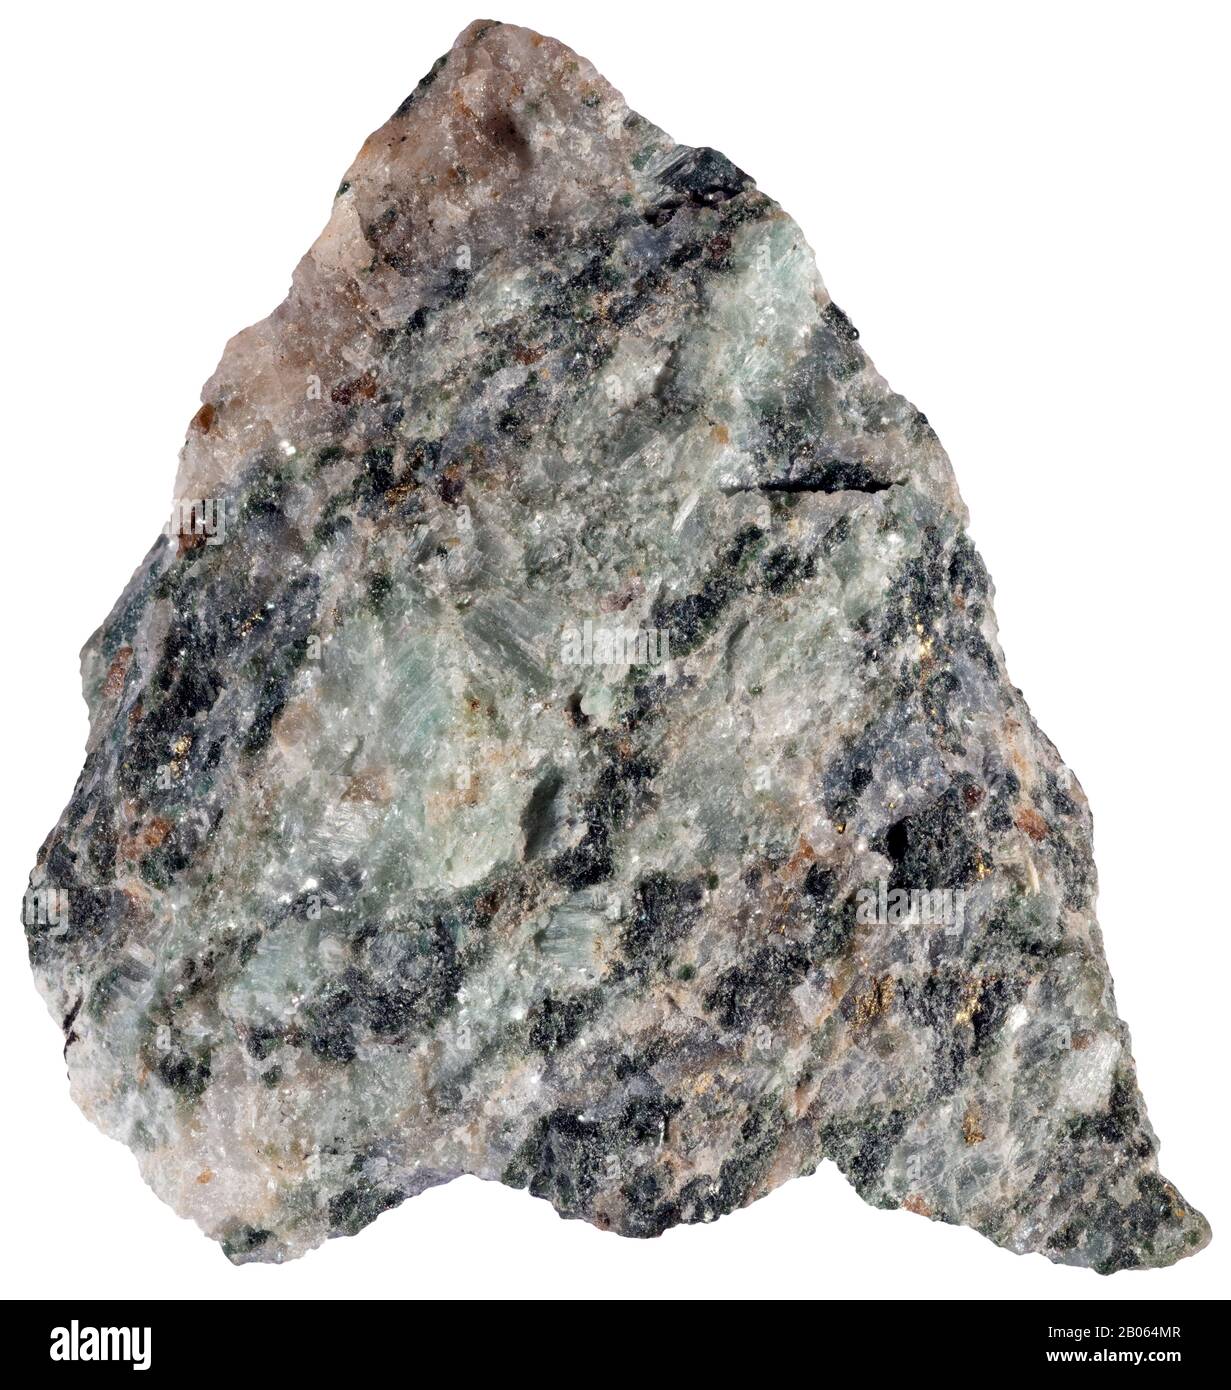 Augen Gneiss, Non Foliated, Oka, Quebec Augen Gneiss is a coarse-grained gneiss resulting from metamorphism of granite. Stock Photo